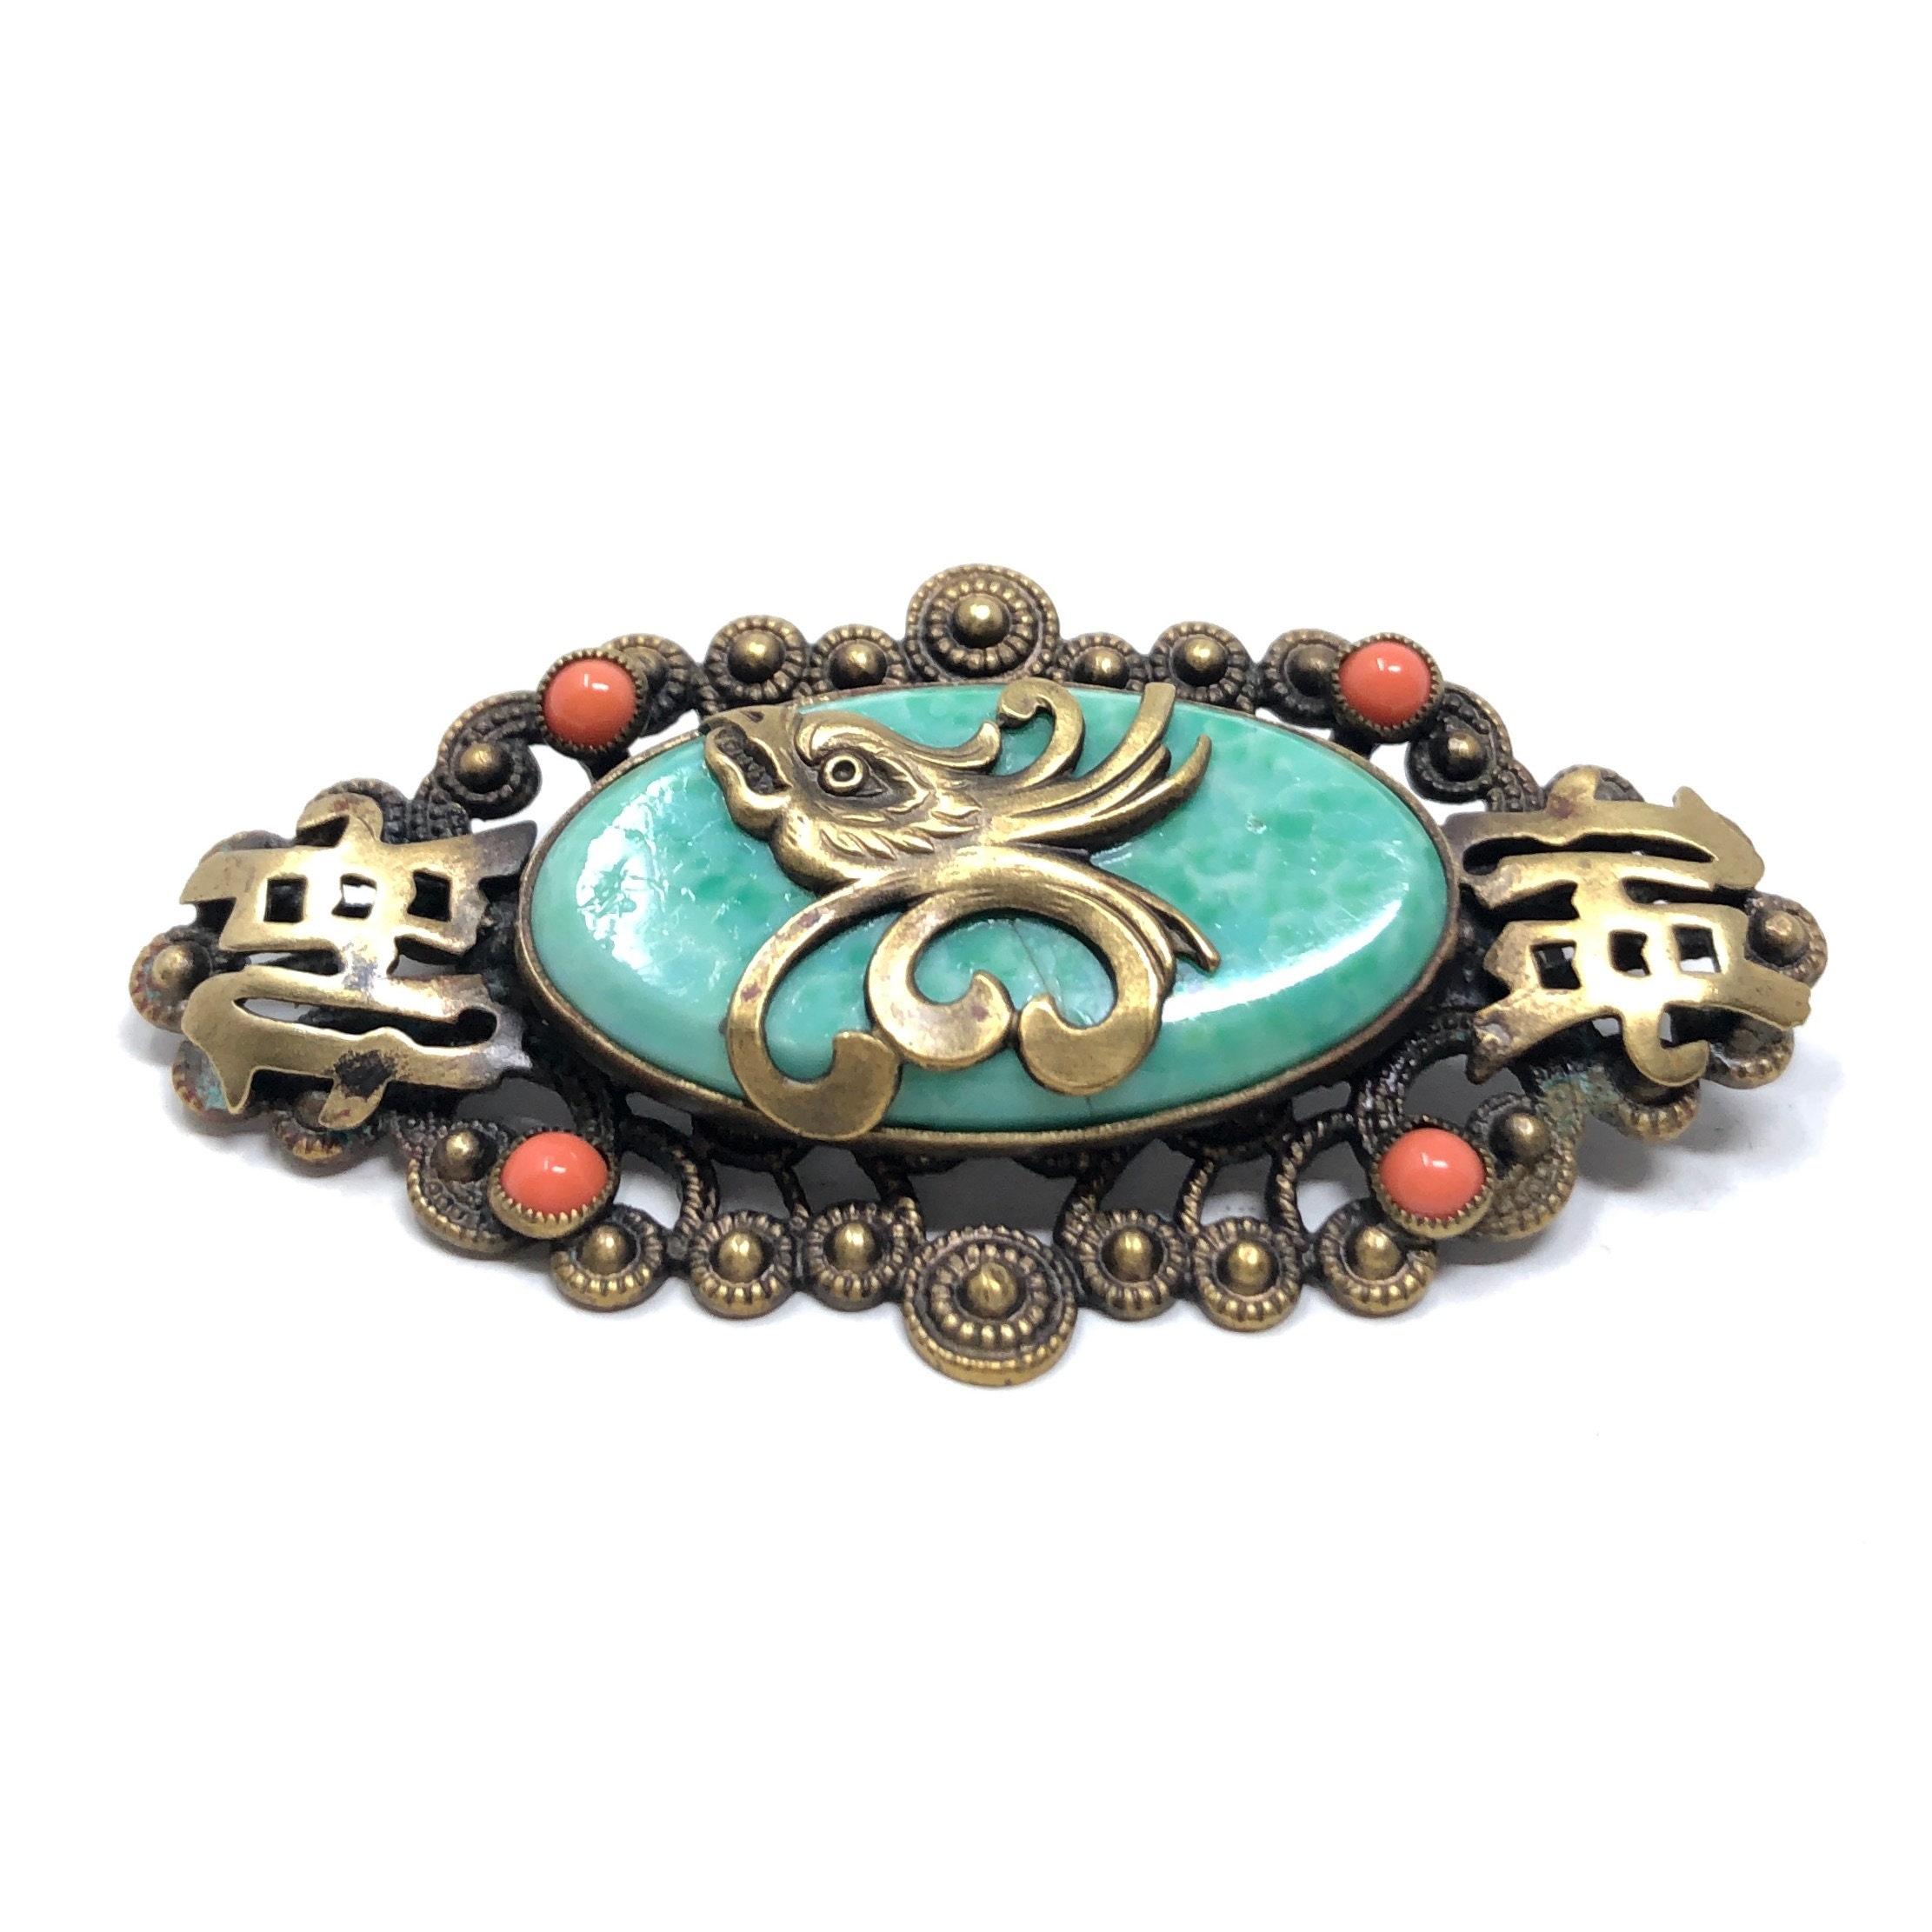 Neiger Brothers 1920s Art Deco East Asian Inspired Vintage Brooch